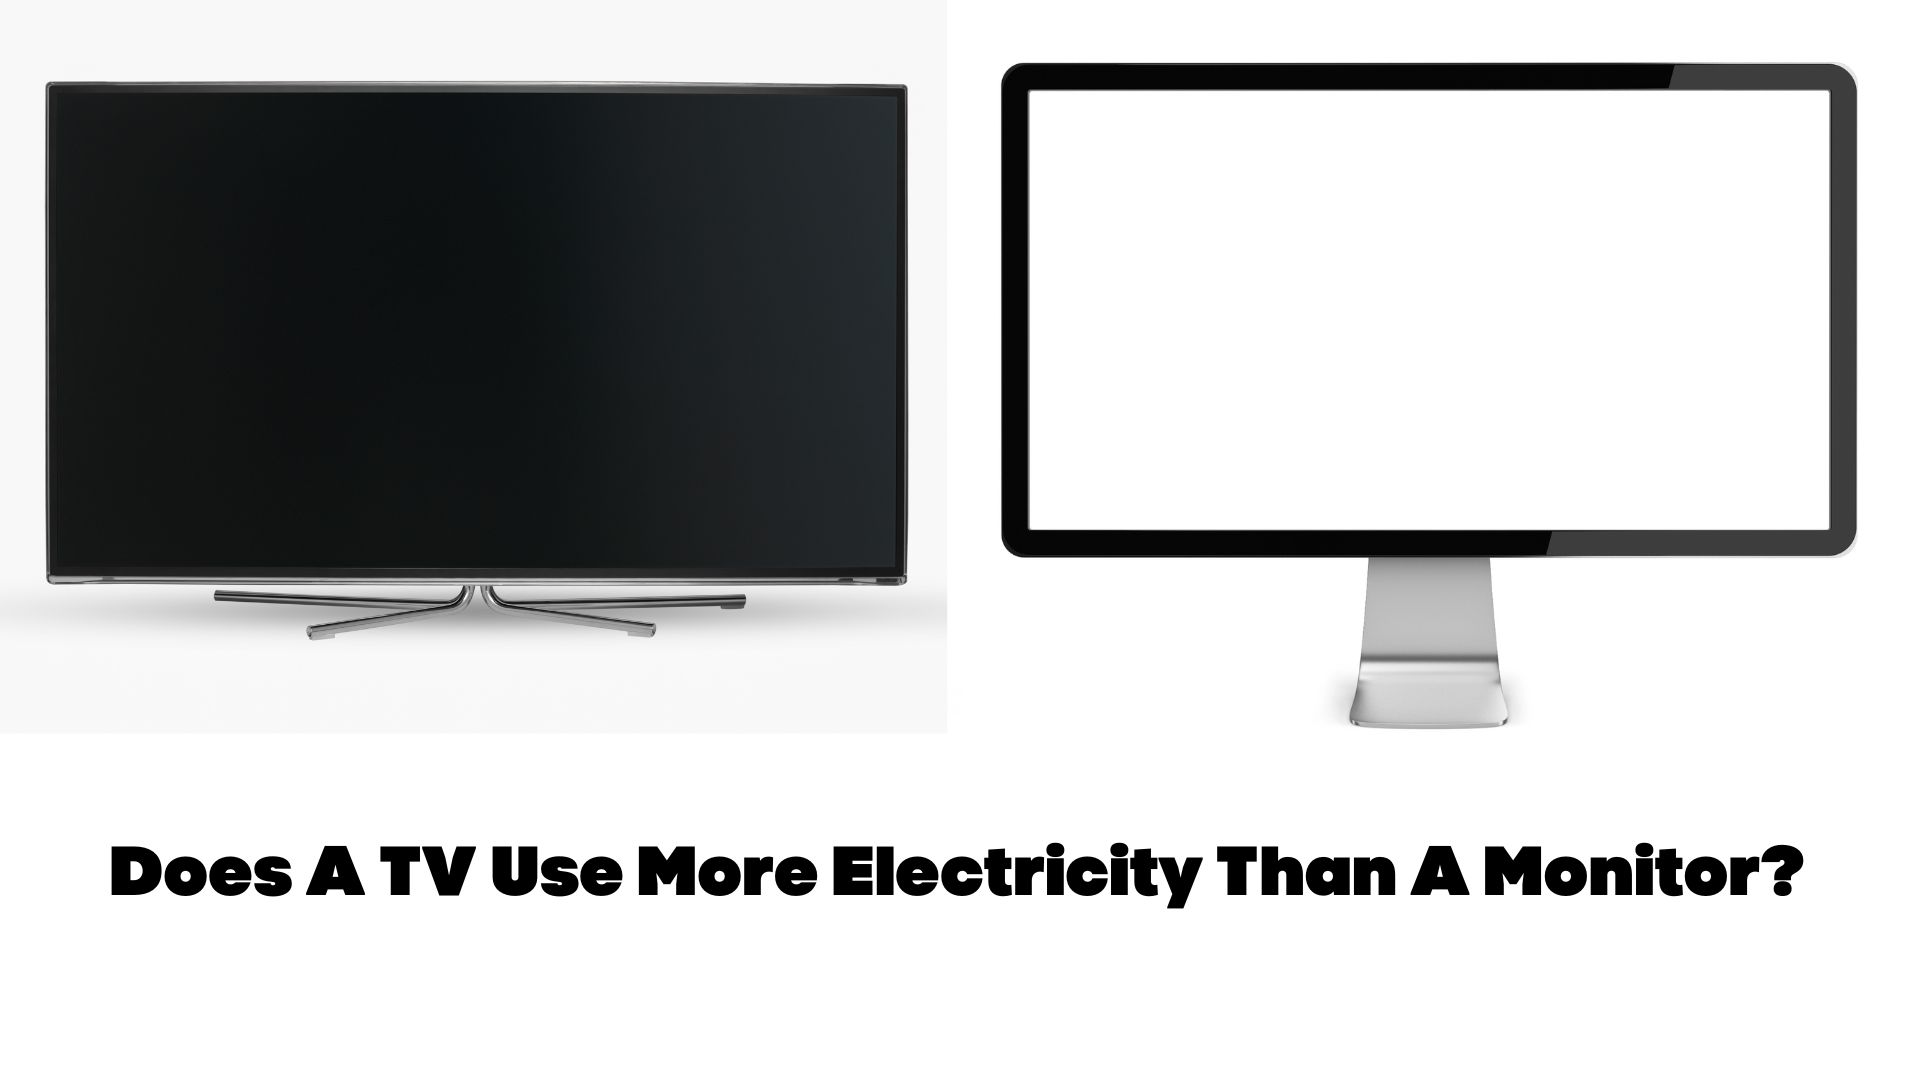 Does A TV Use More Electricity Than A Monitor